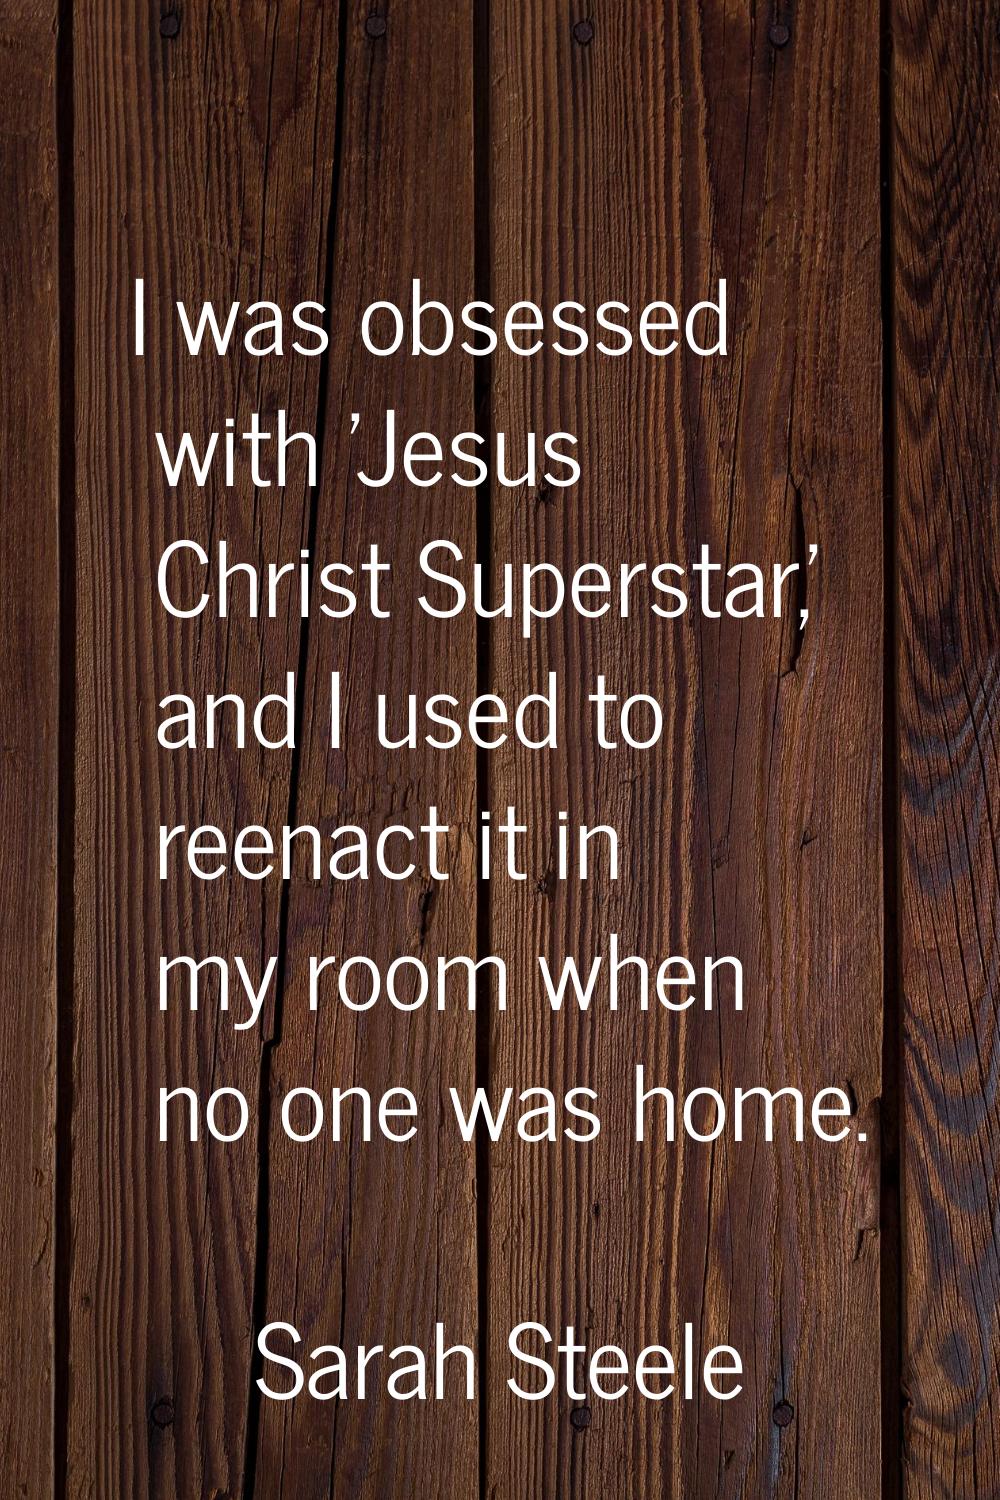 I was obsessed with 'Jesus Christ Superstar,' and I used to reenact it in my room when no one was h